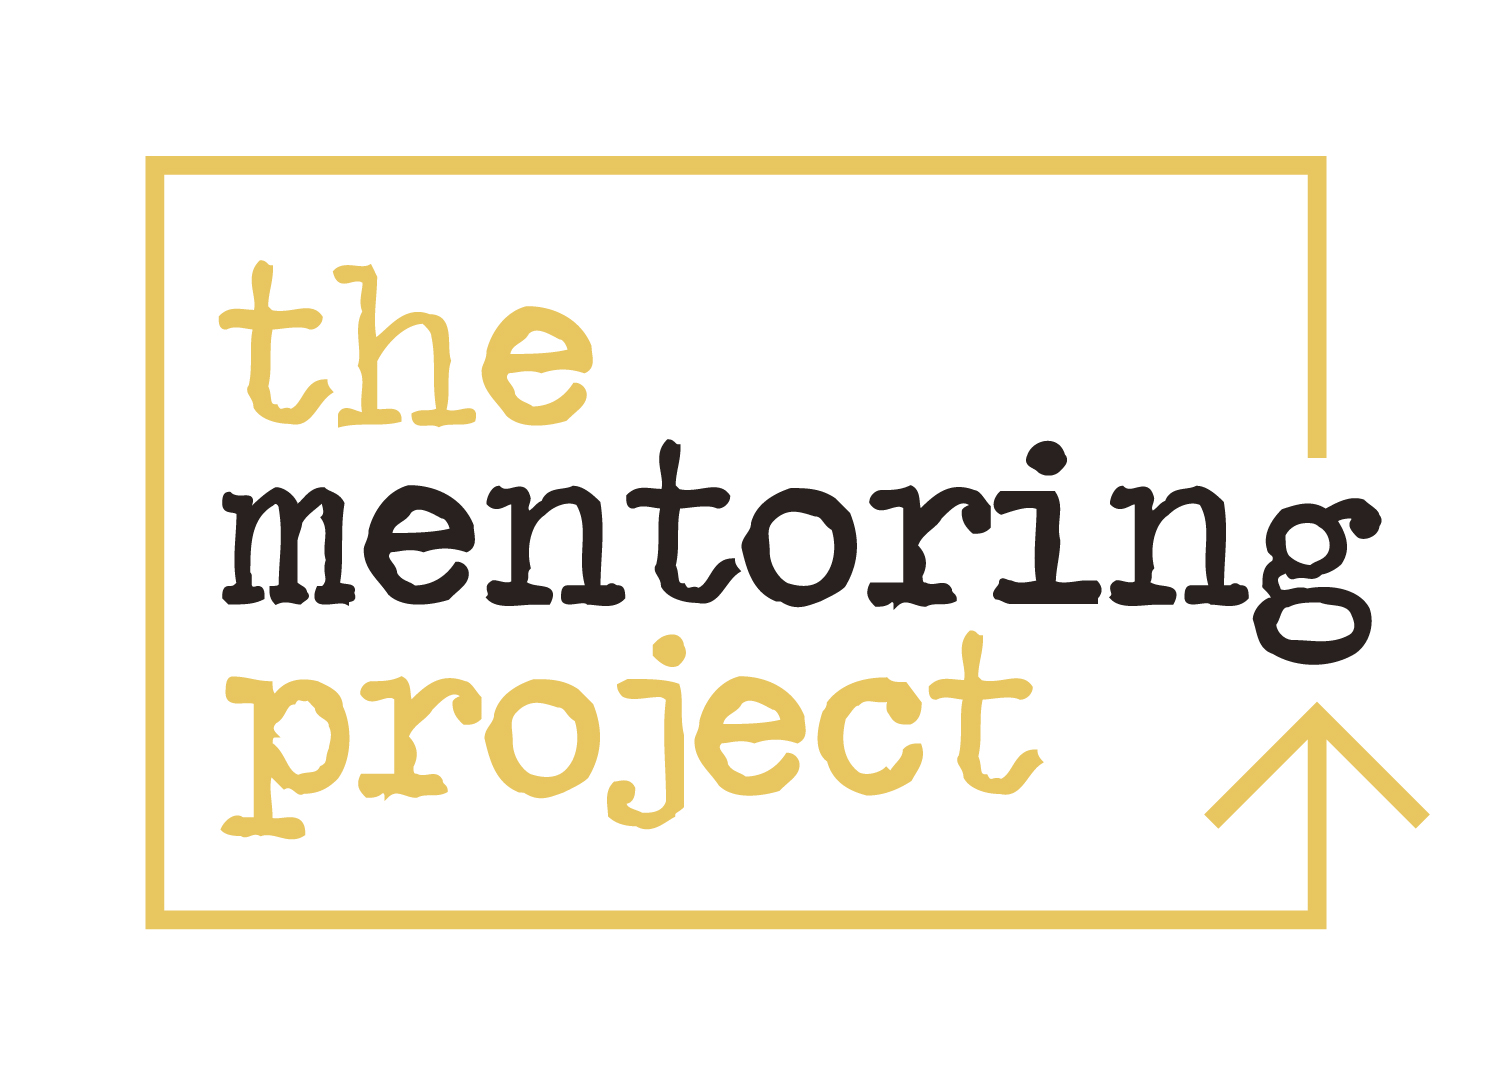 Register for The Mentoring Project